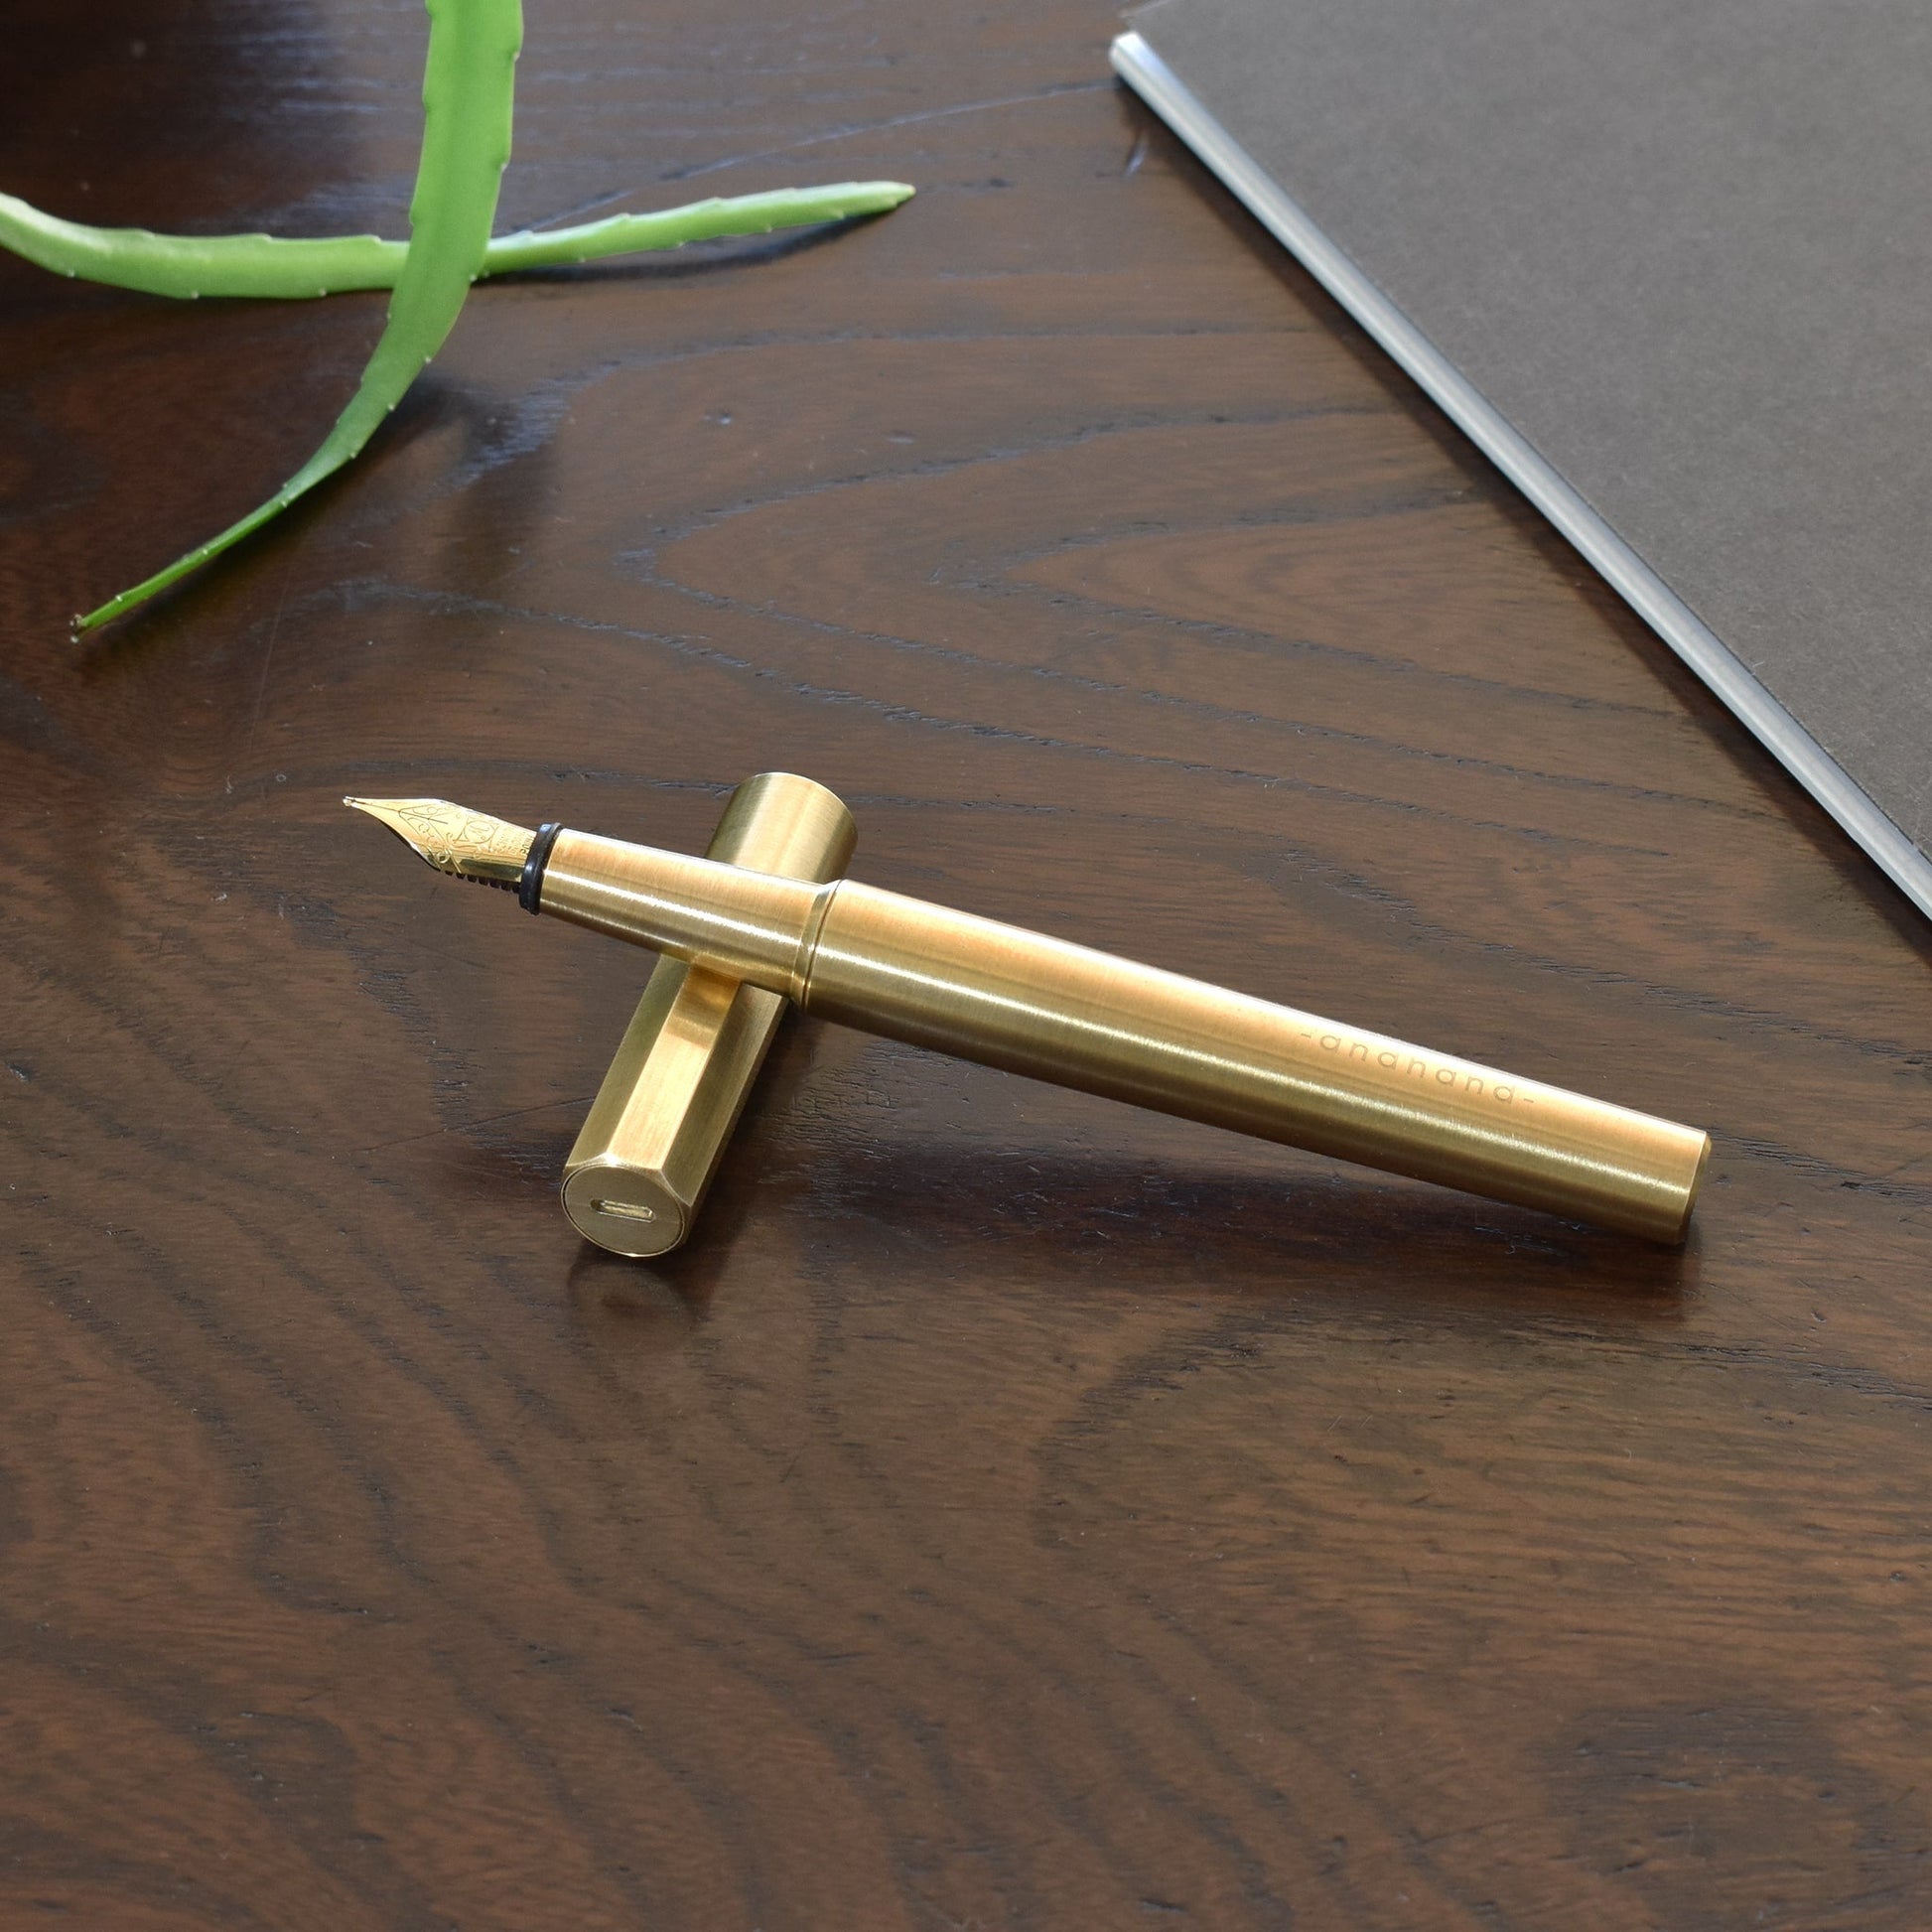 Fountain Pen by Andhand. Brass pen with gold plated nib. Ideal fountain pen for writing.